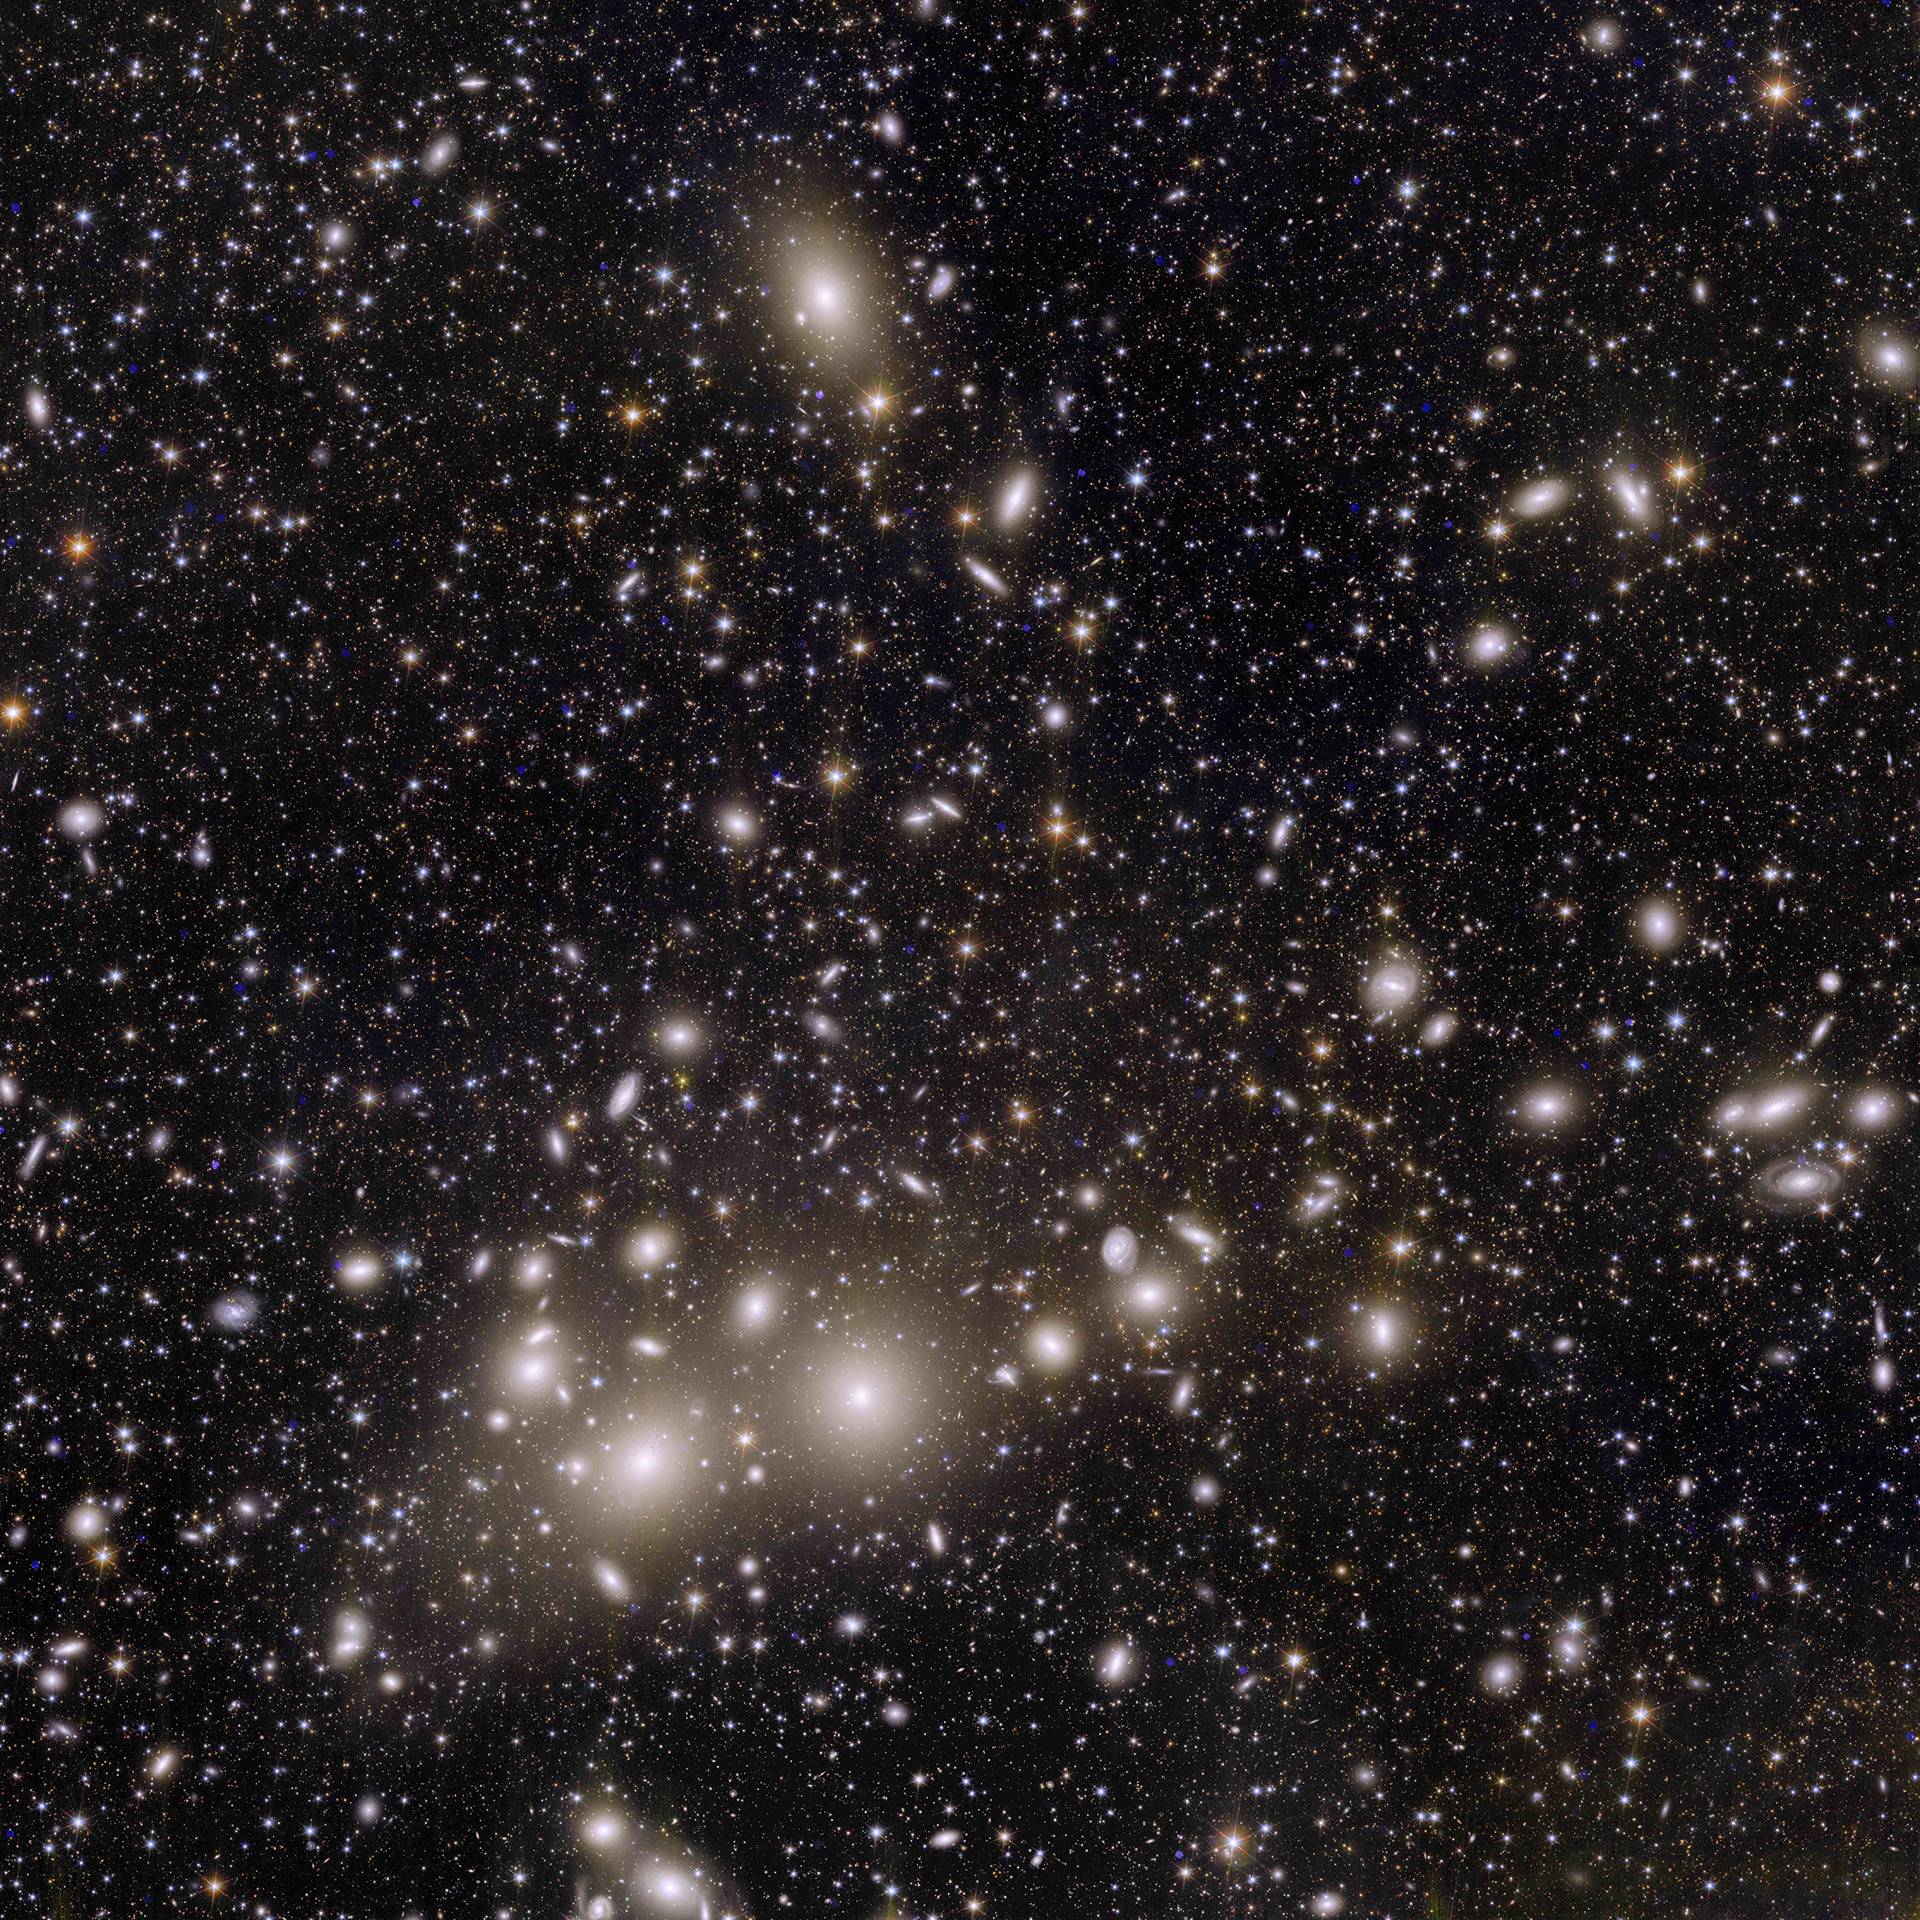 Euclid_s_view_of_the_Perseus_cluster_of_galaxies